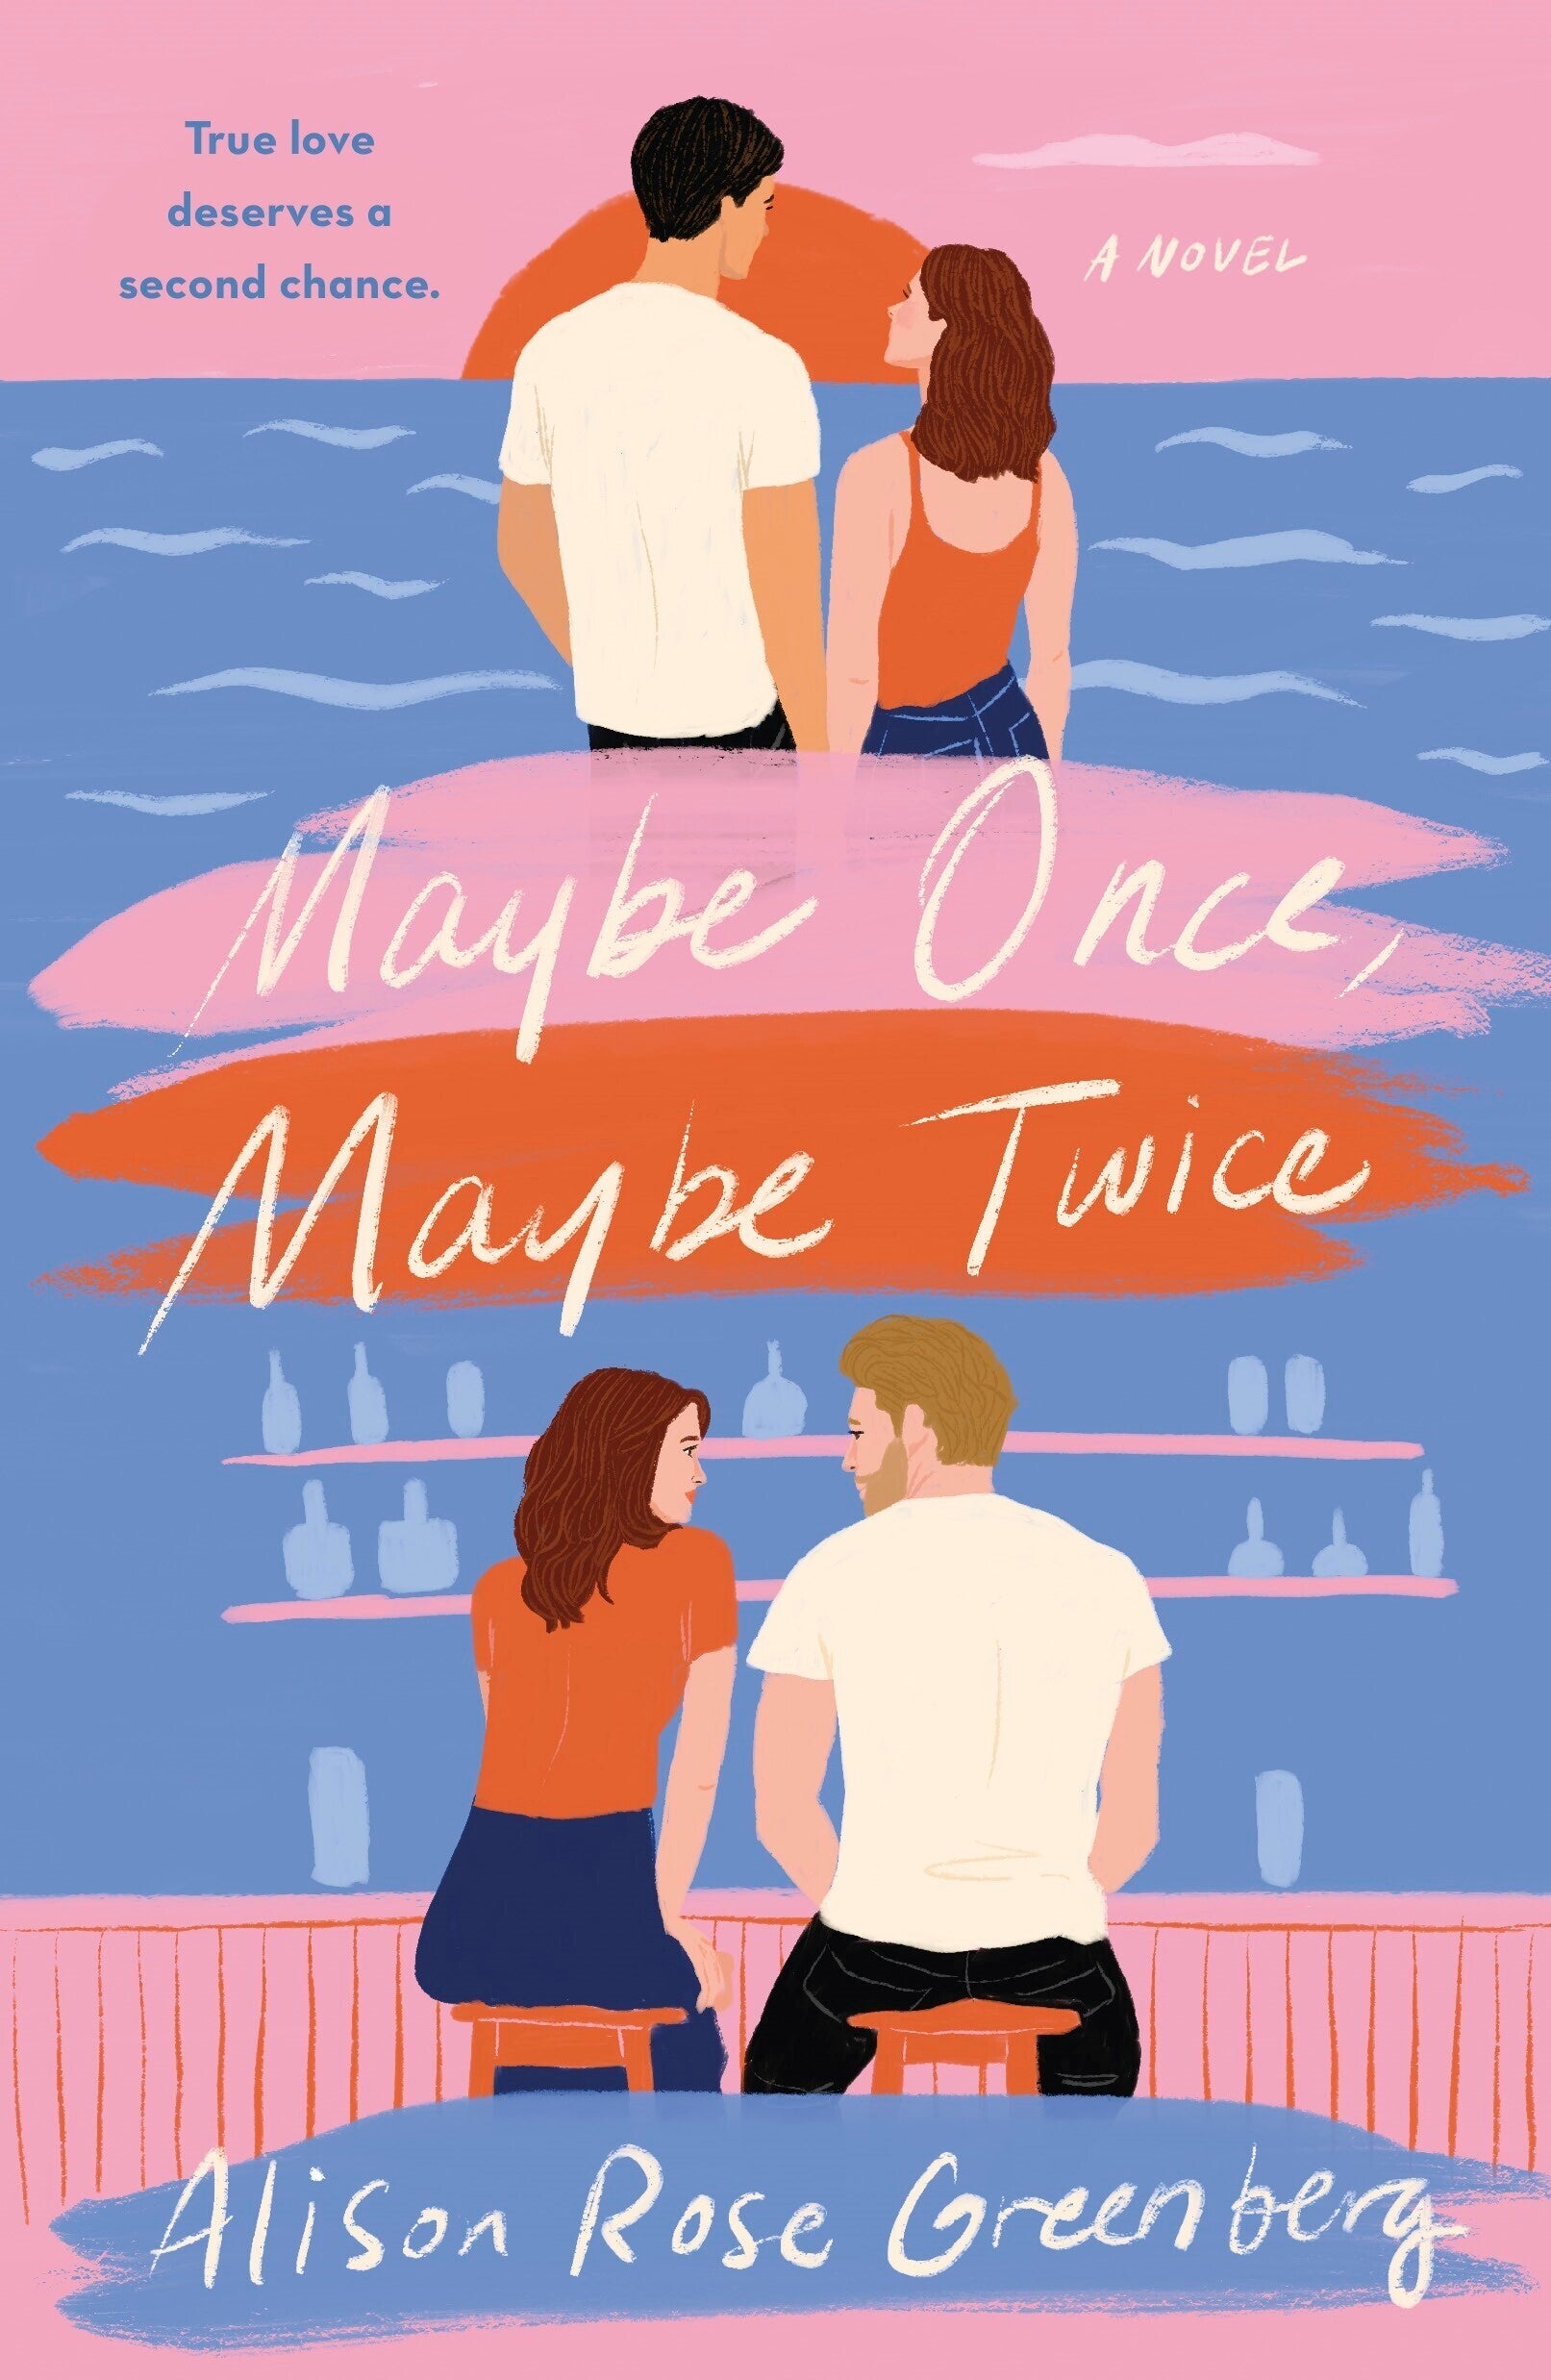 Book Review - Maybe Once, Maybe Twice